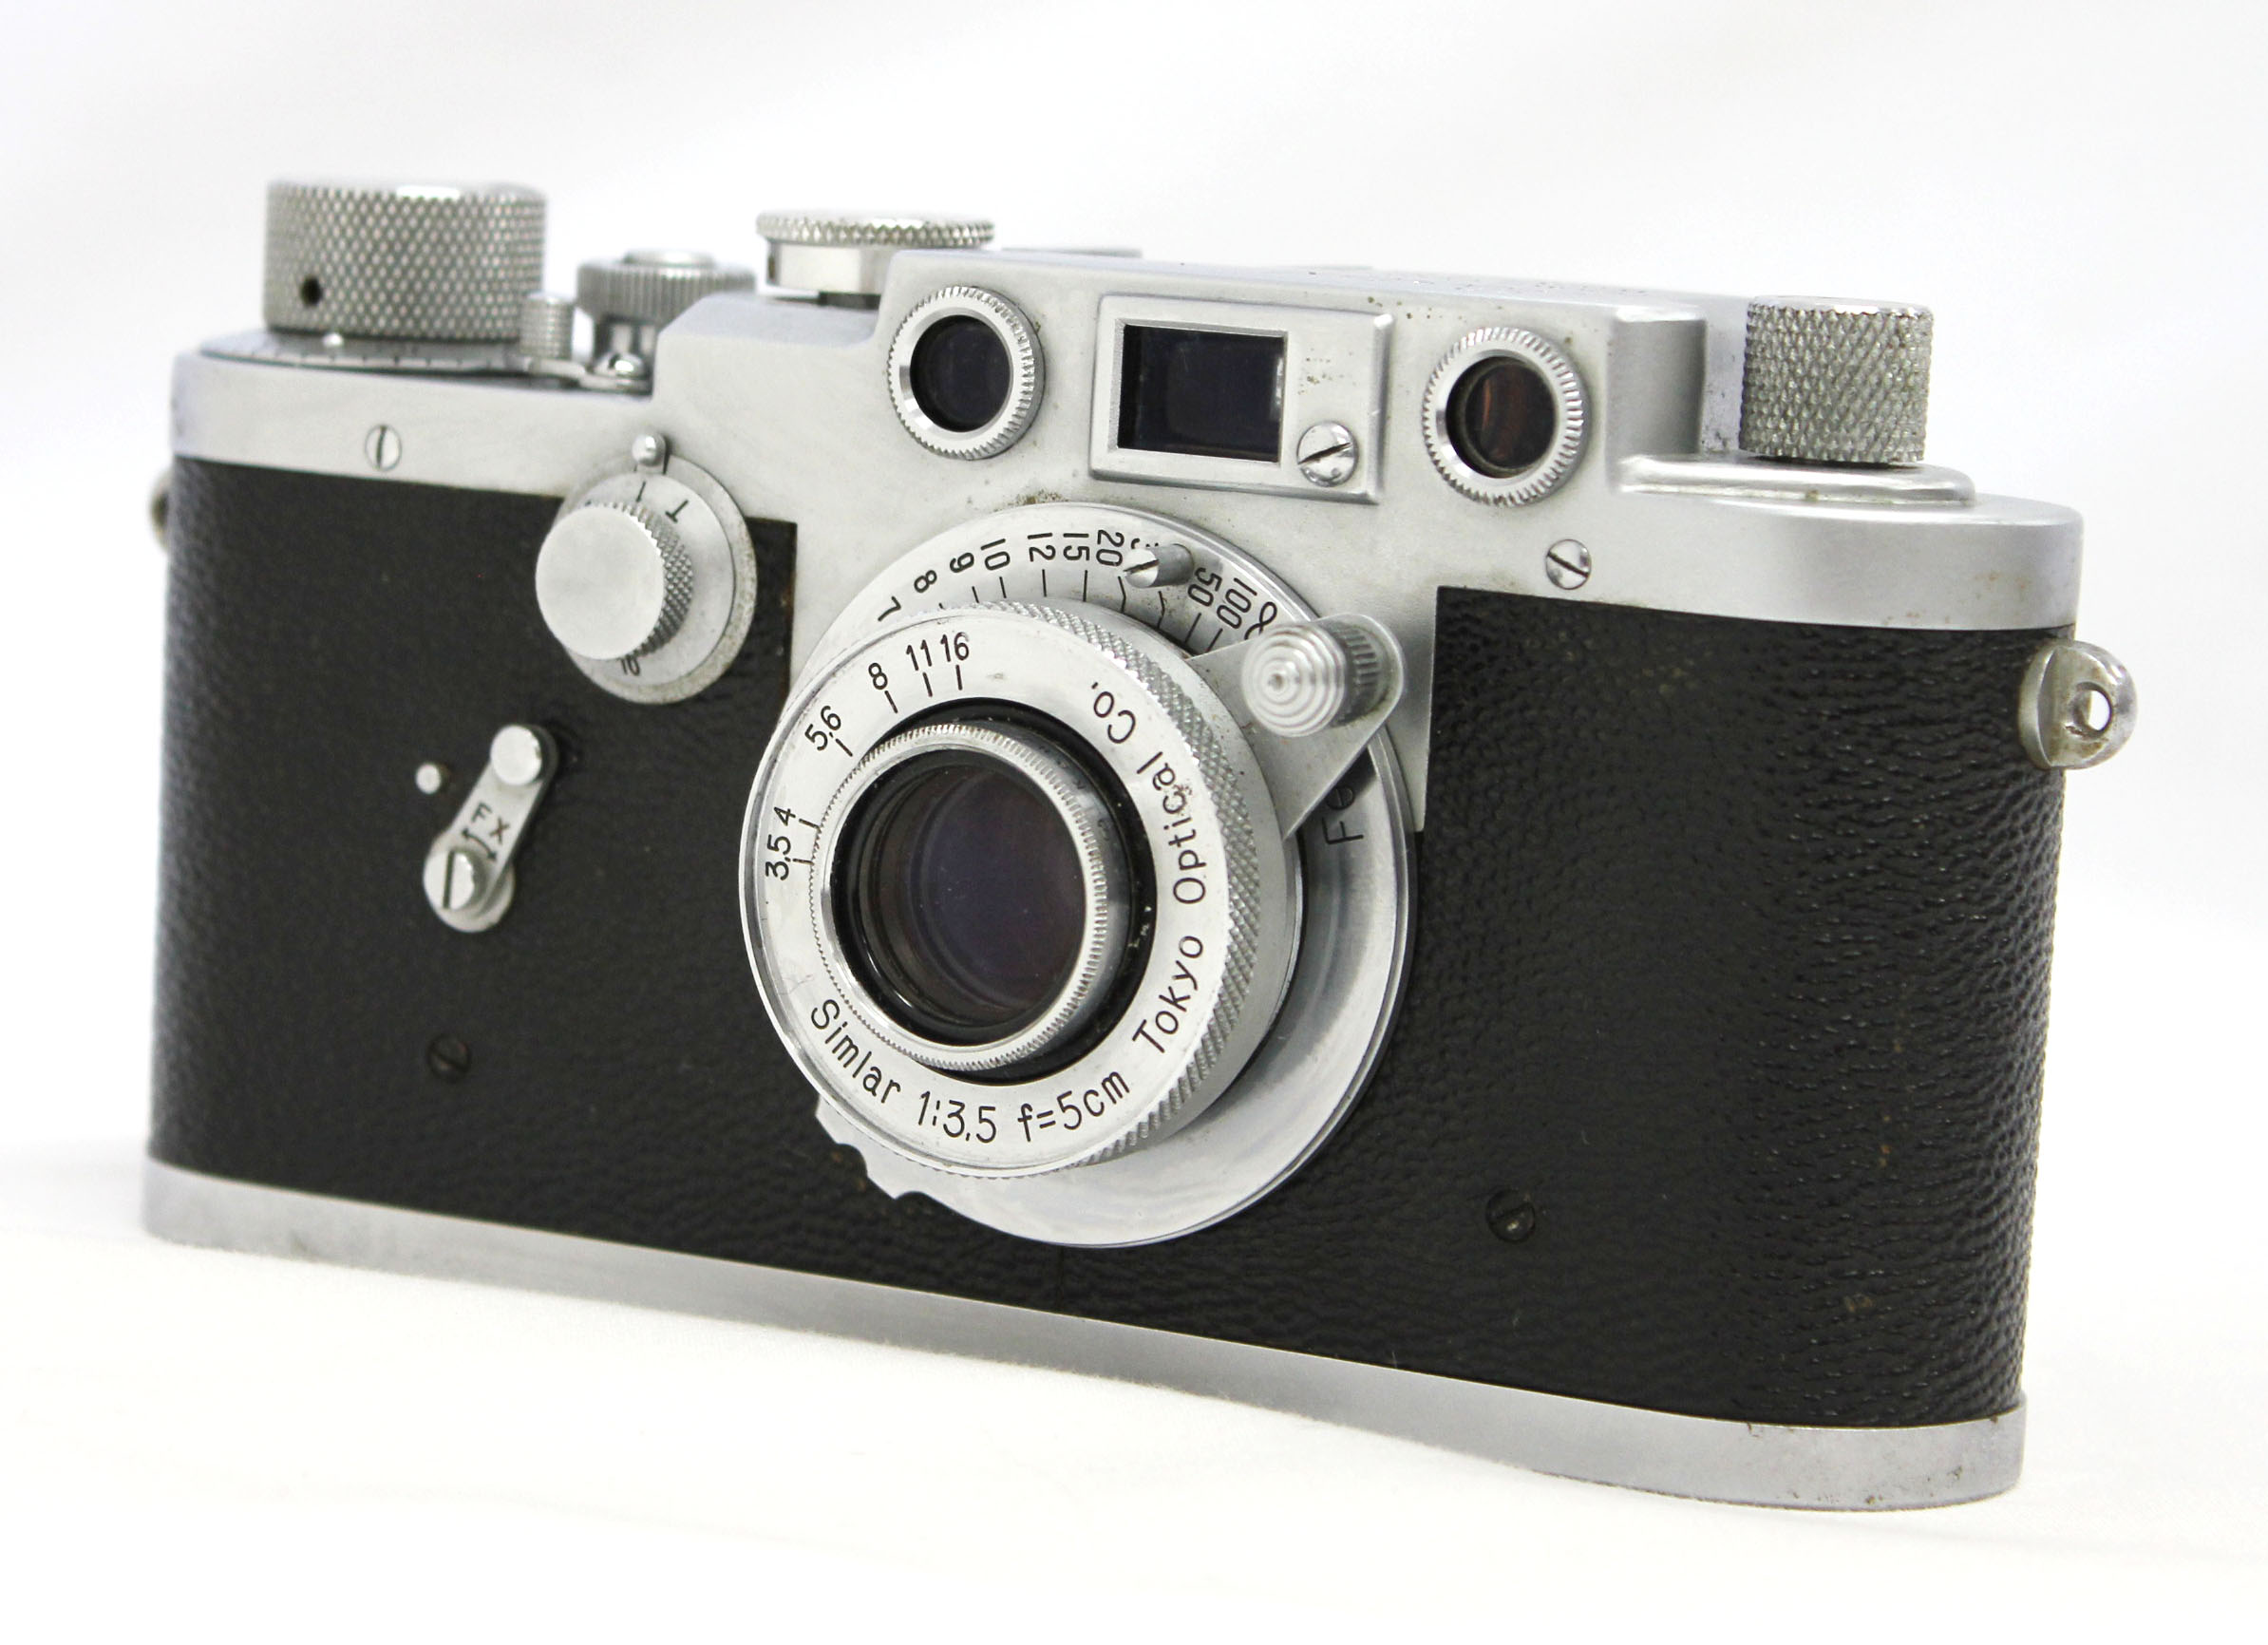 Leotax F Leica Screw Mount LTM M39 Rangefinder Camera with 50mm F/3.5 Lens from Japan